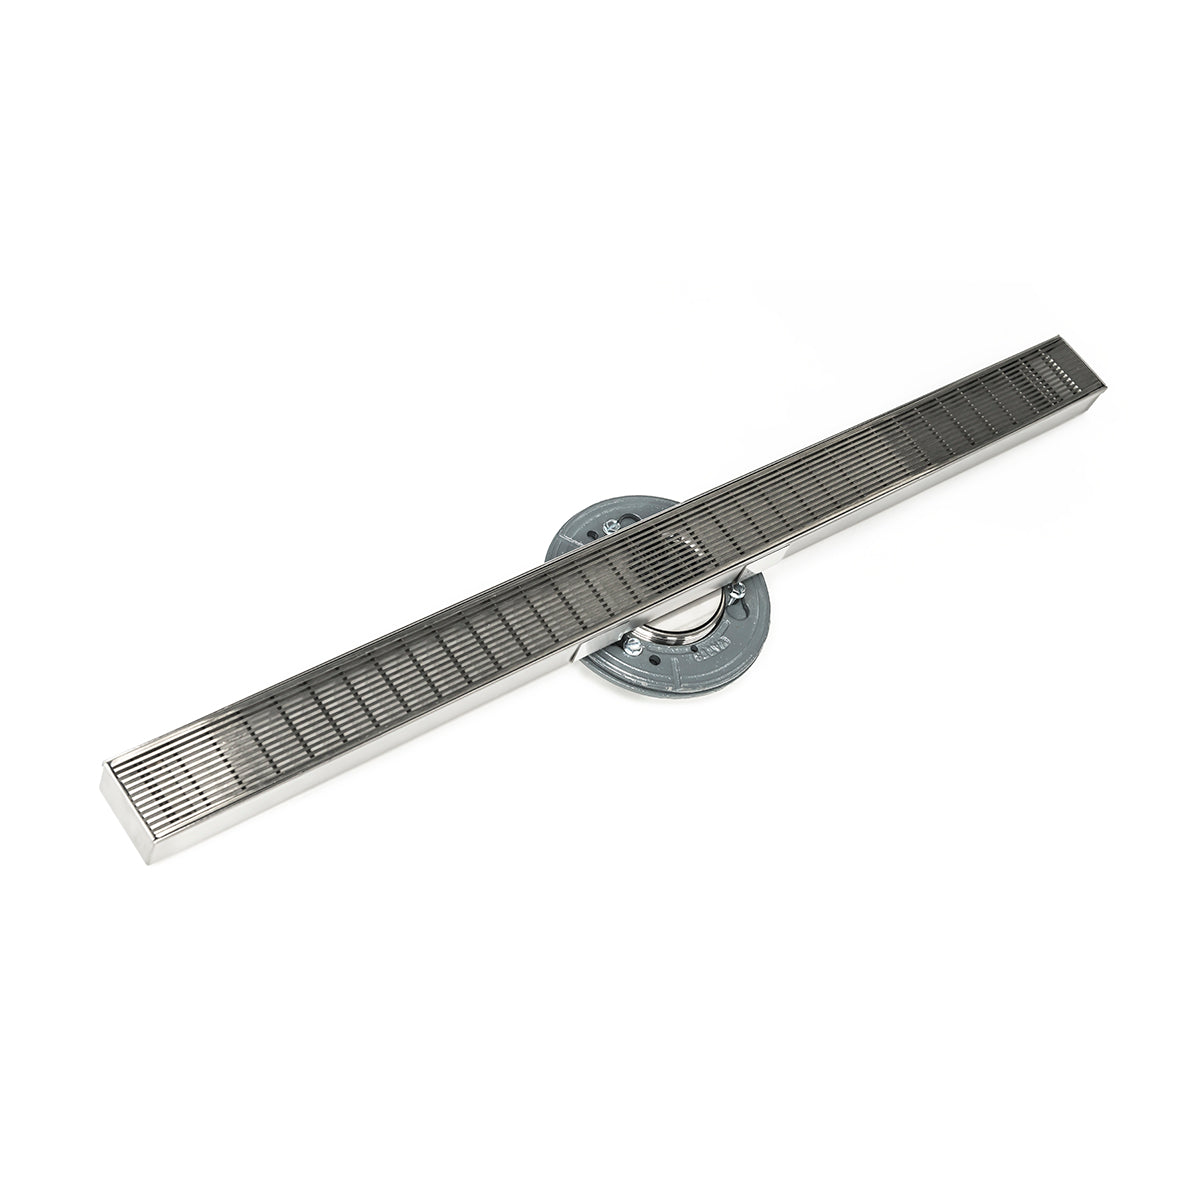 Infinity Drain 36" S-Stainless Steel Series High Flow Site Sizable Linear Drain Kit with 2 1/2" Wedge Wire Grate with Cast Iron Drain Body, 3" No Hub Outlet